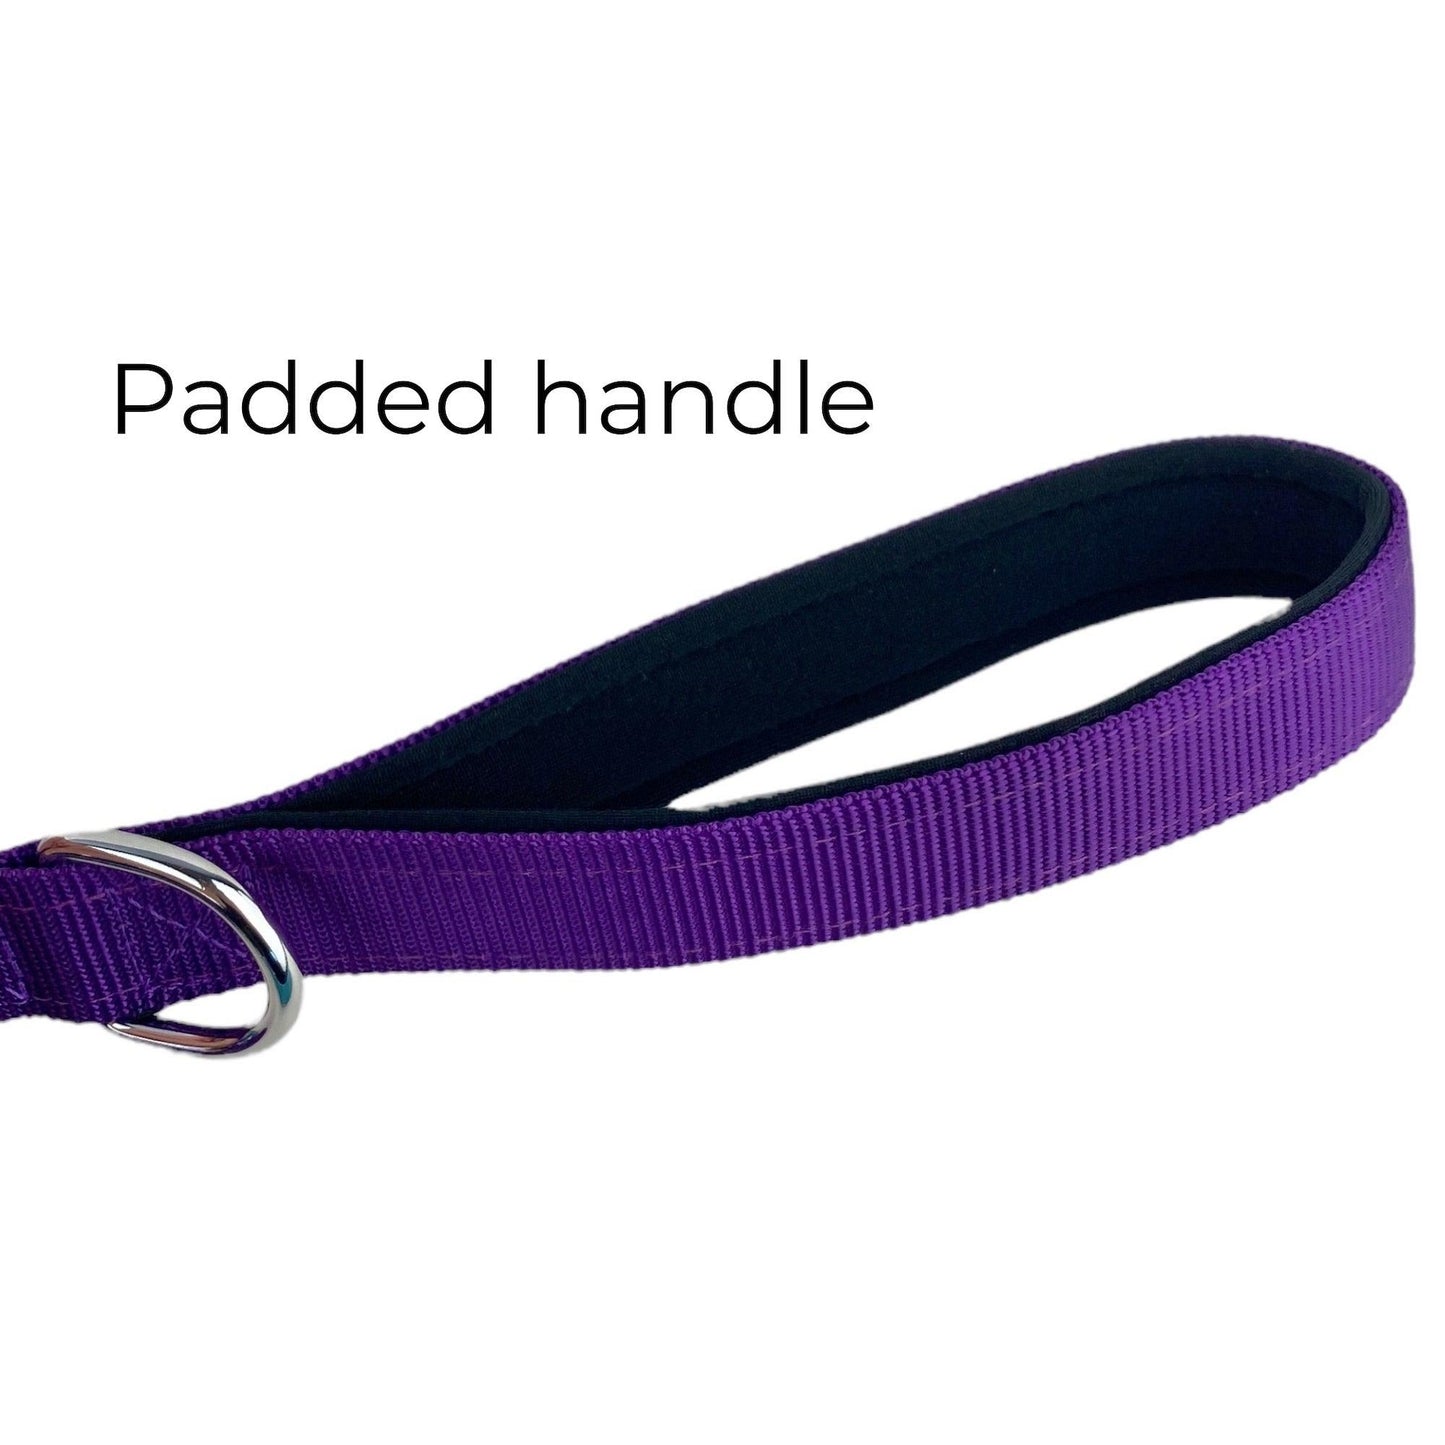 photo of a padded handle from a purple dog leash from fearless pet